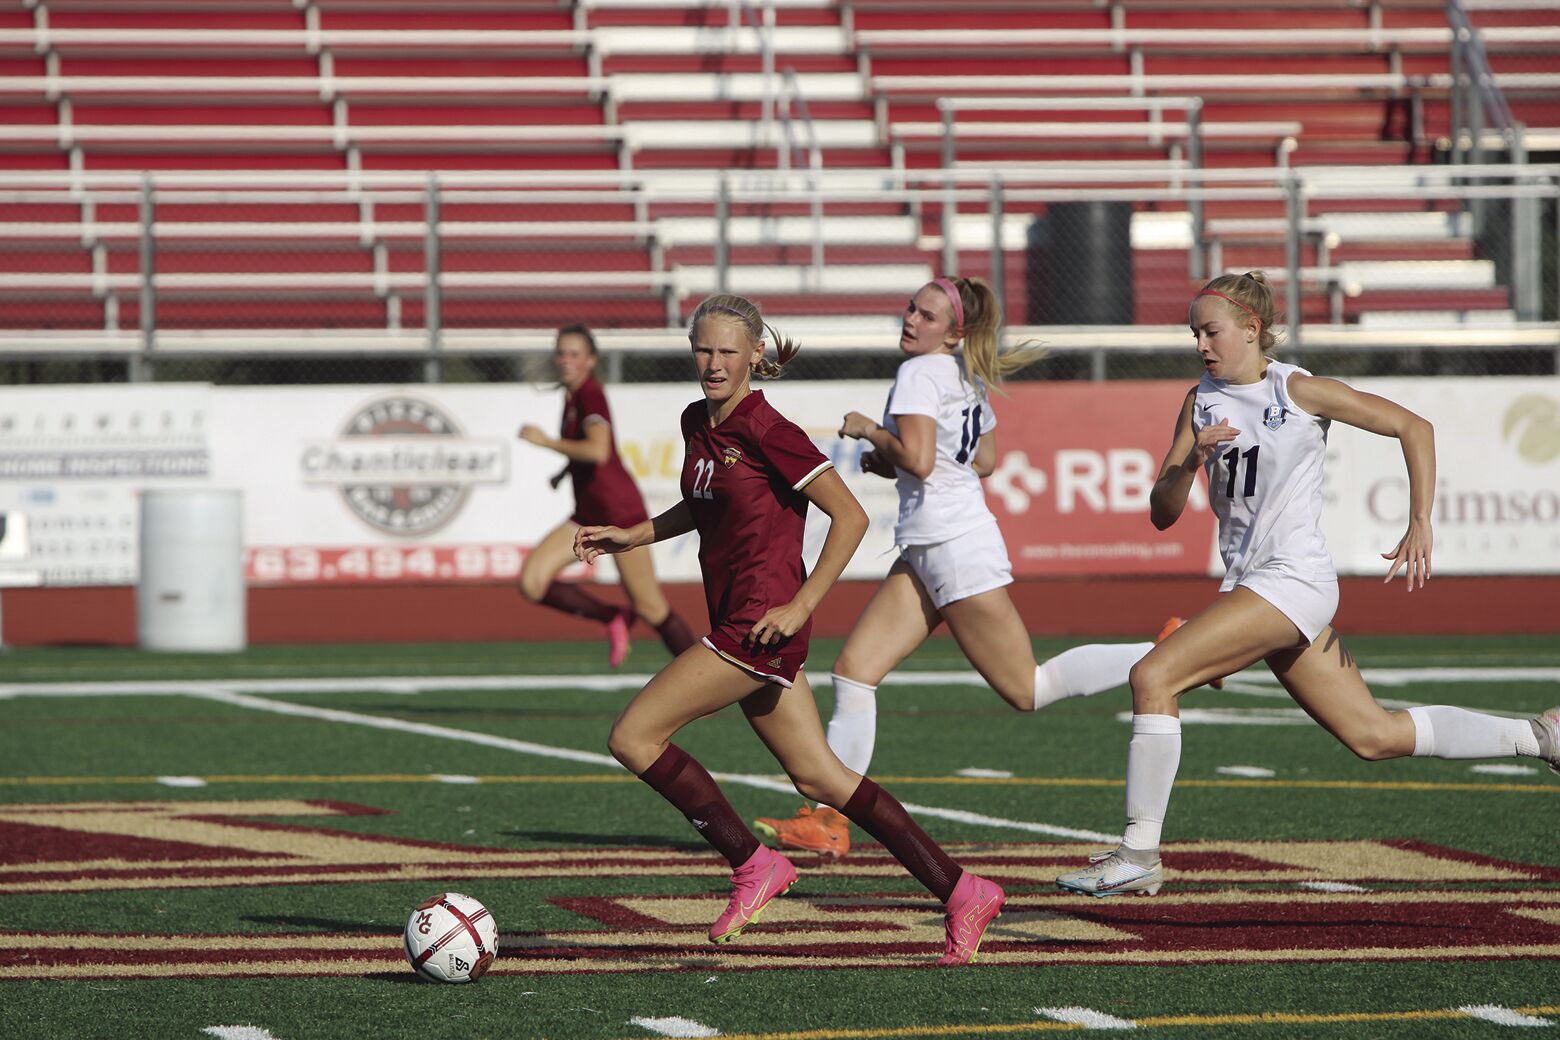 Maple Grove girls soccer team suffers 3-0 loss against Blaine, show improvement in the second half